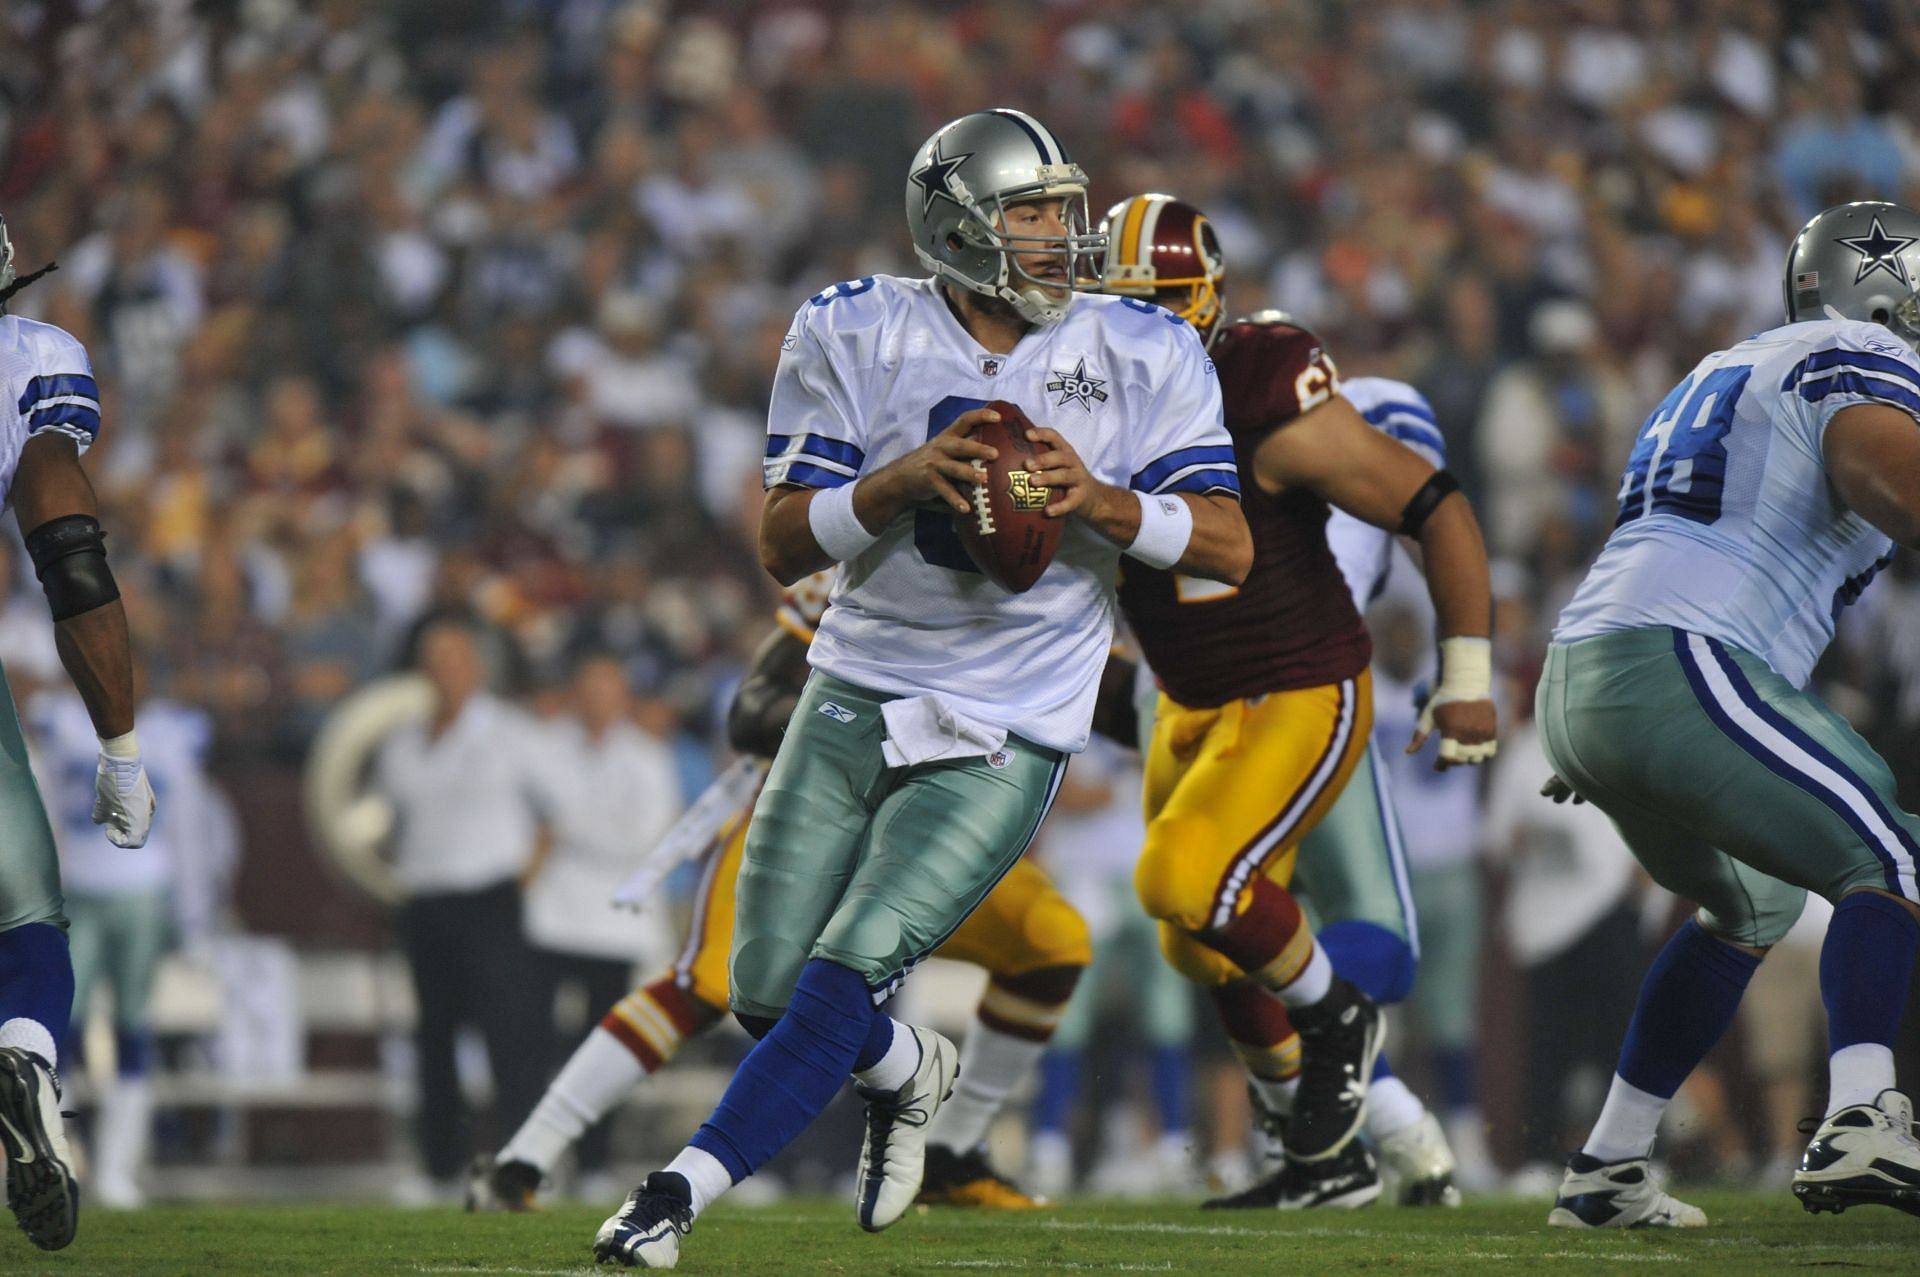 Tony Romo became one of the great NFL QBs turned commentators